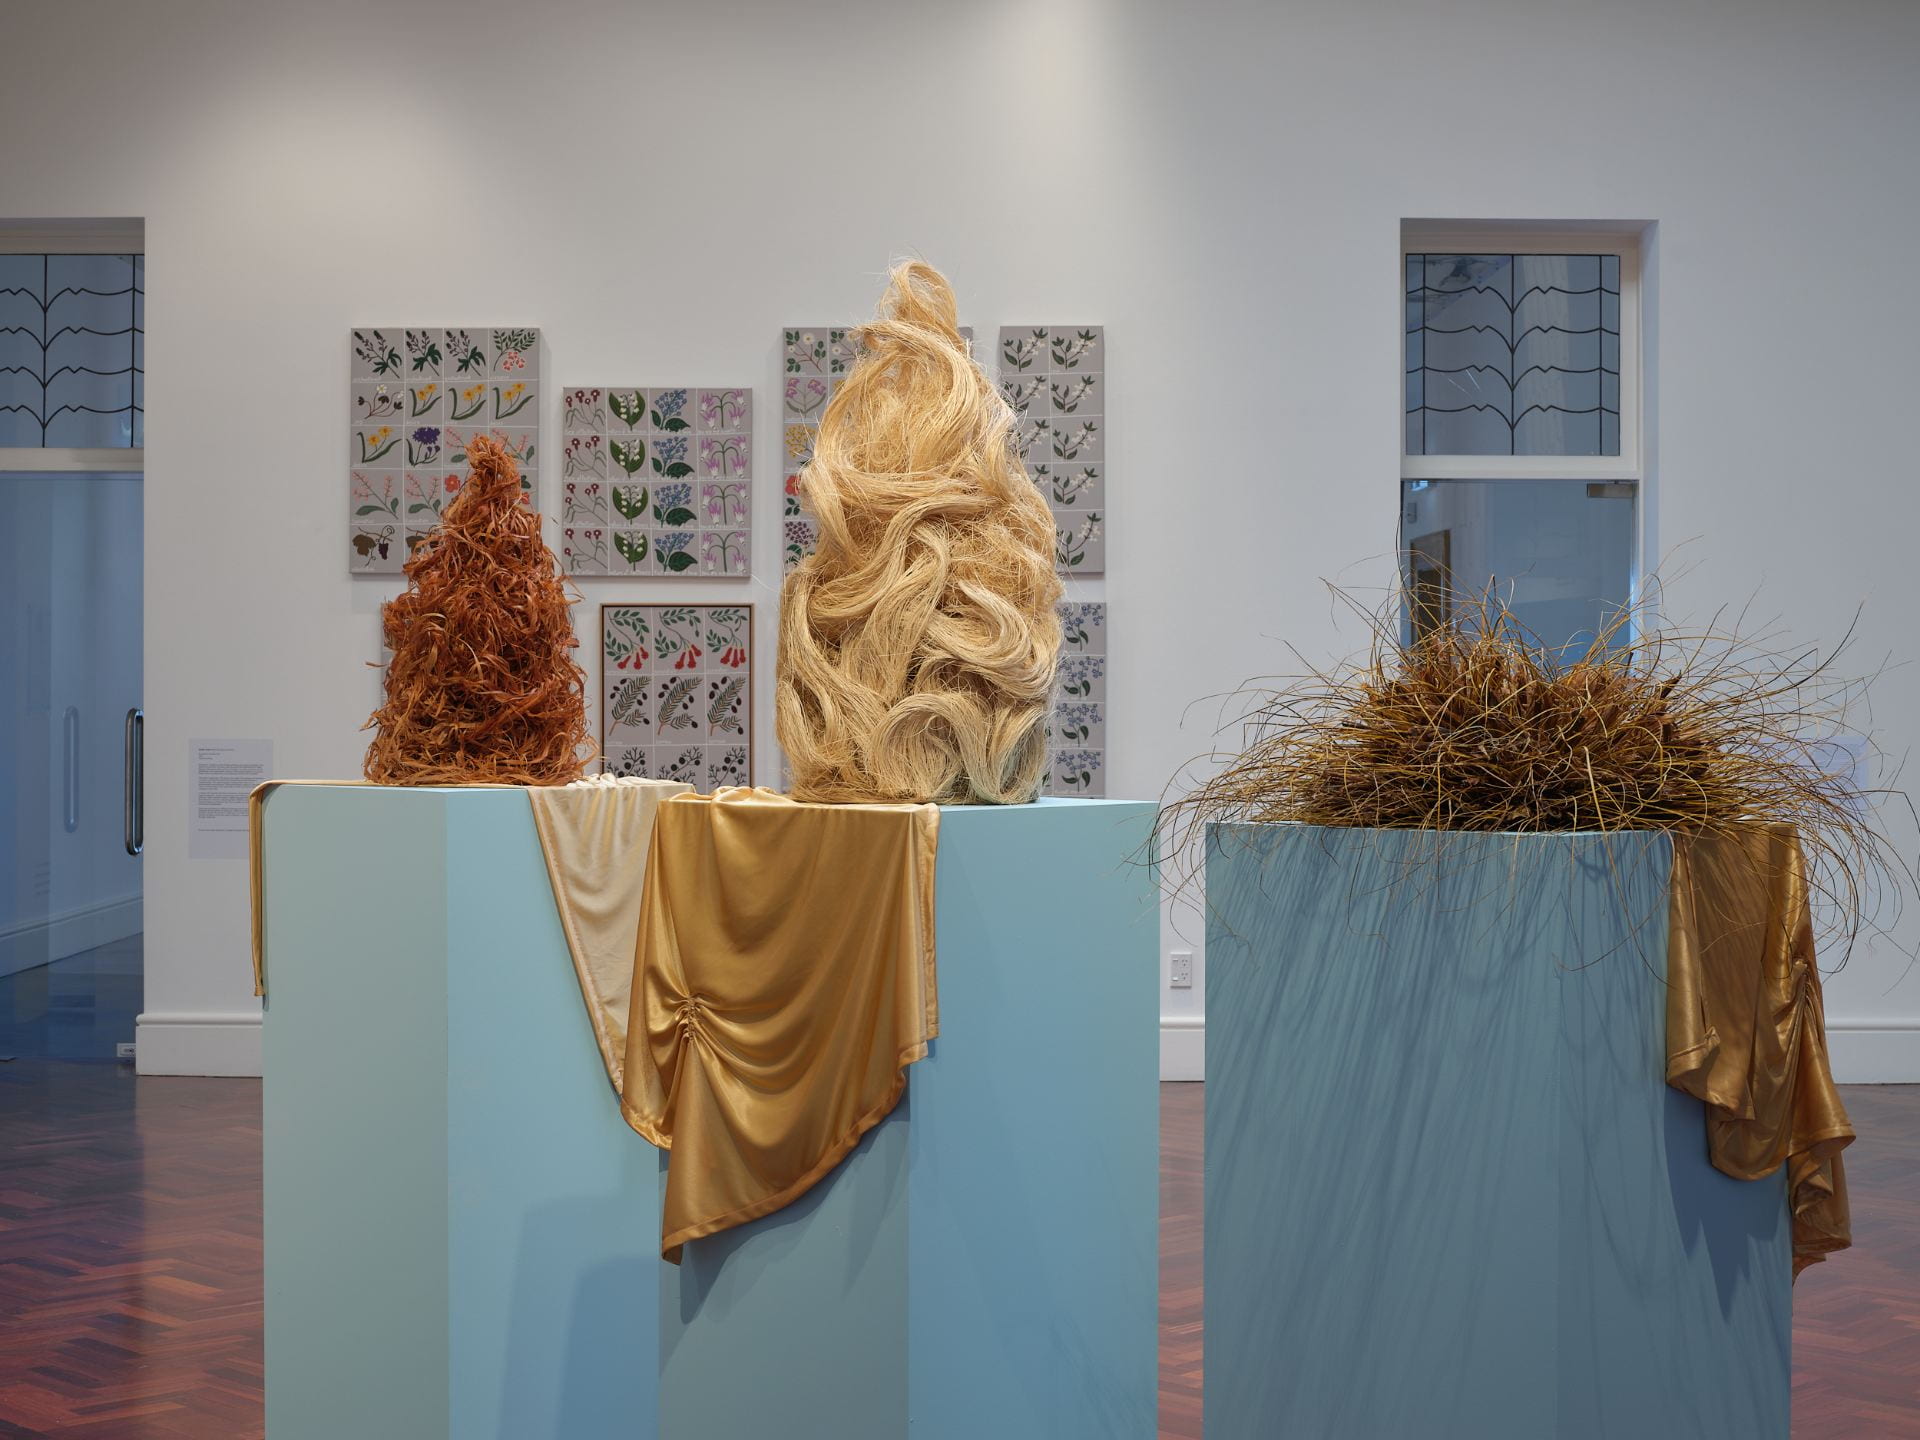 Three tall wigs made of plant fibres are arranged on three pale blue plinths, with golden fabric draped over each. In the background are a series of flower paintings.